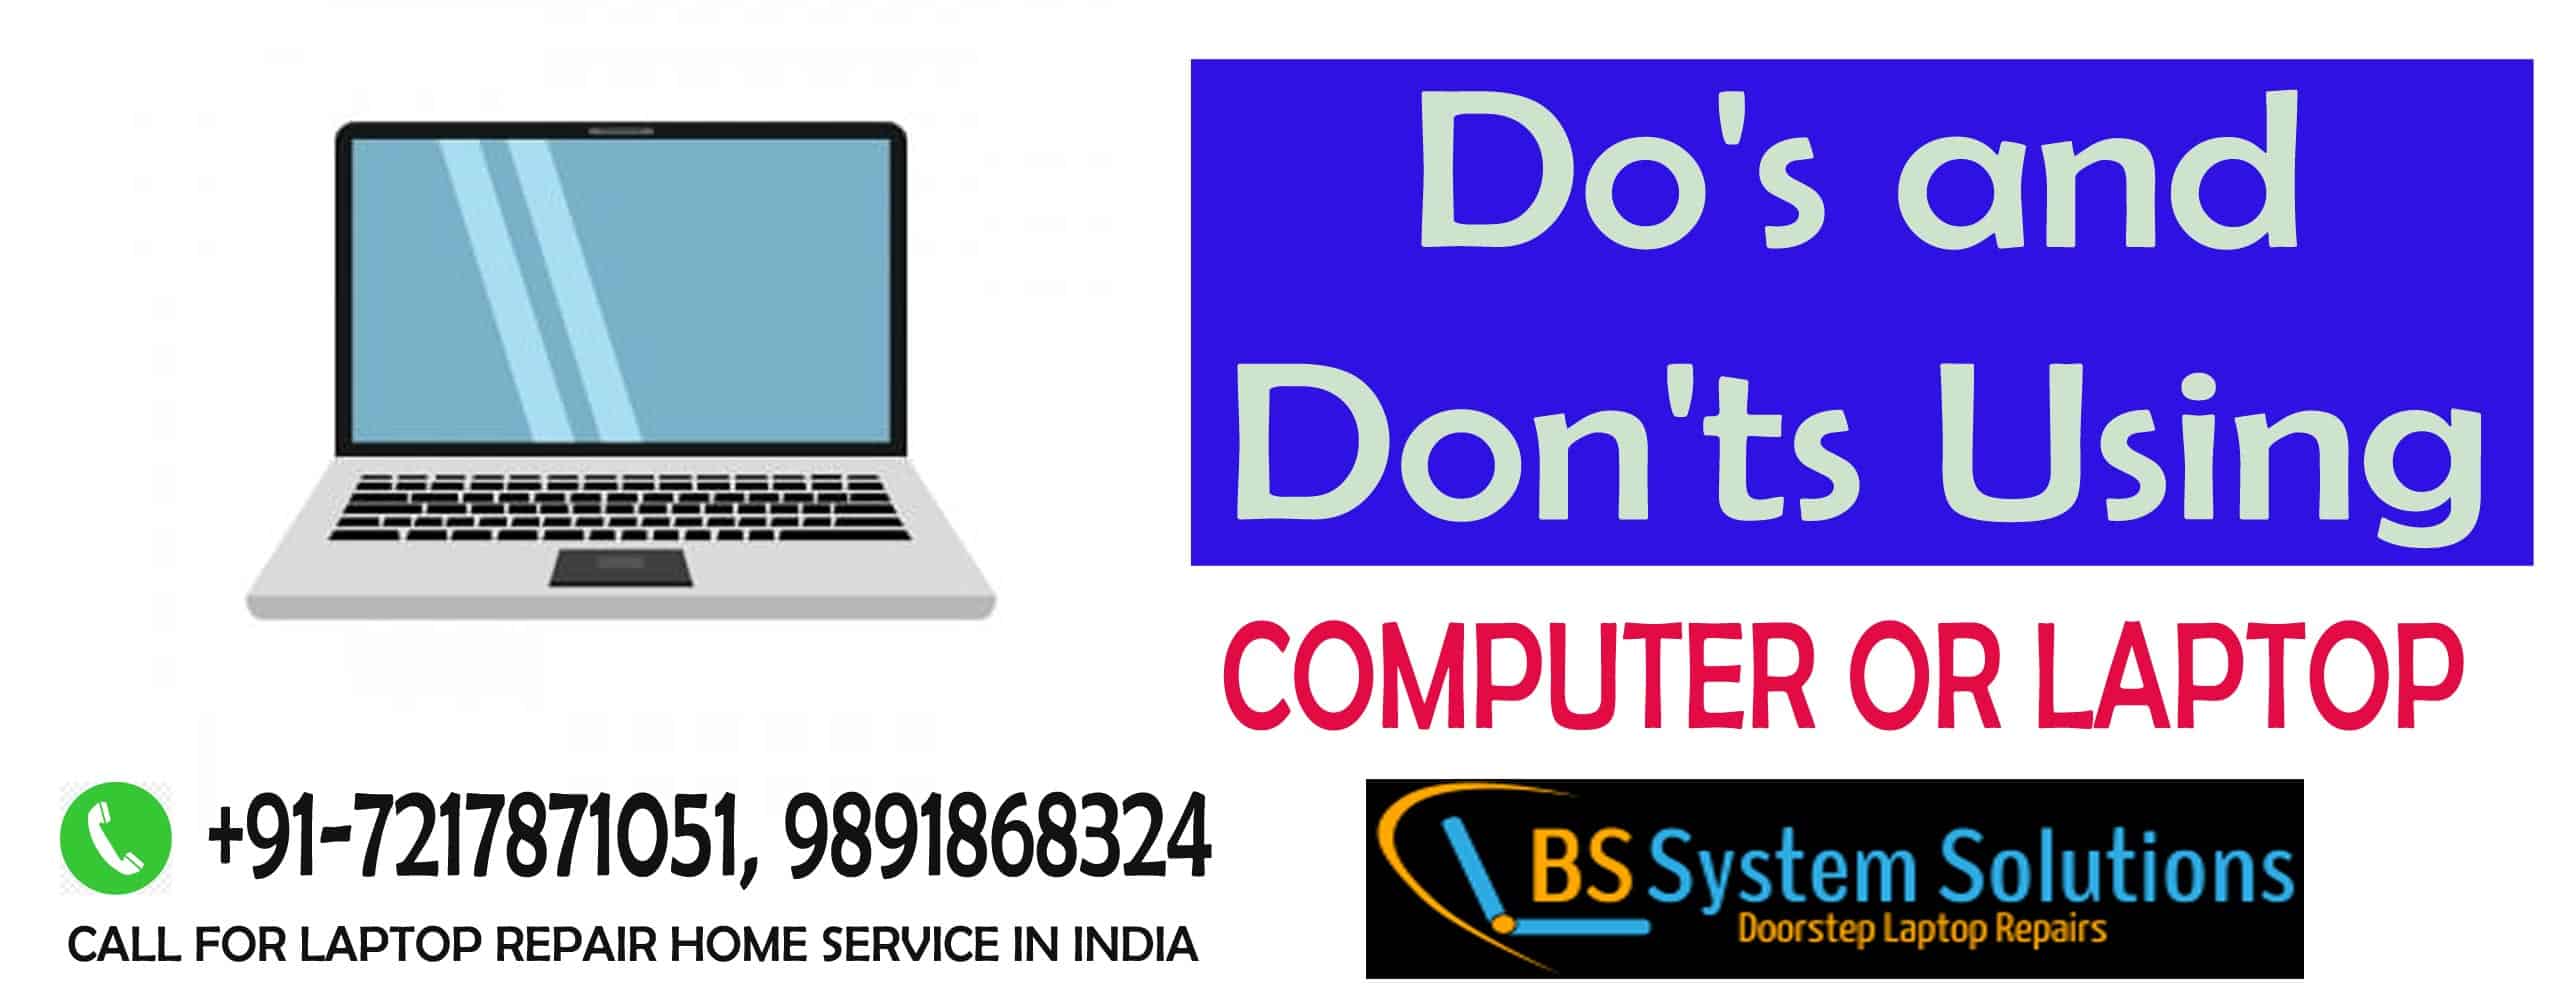 Do's-and-Don'ts-Using-Compu